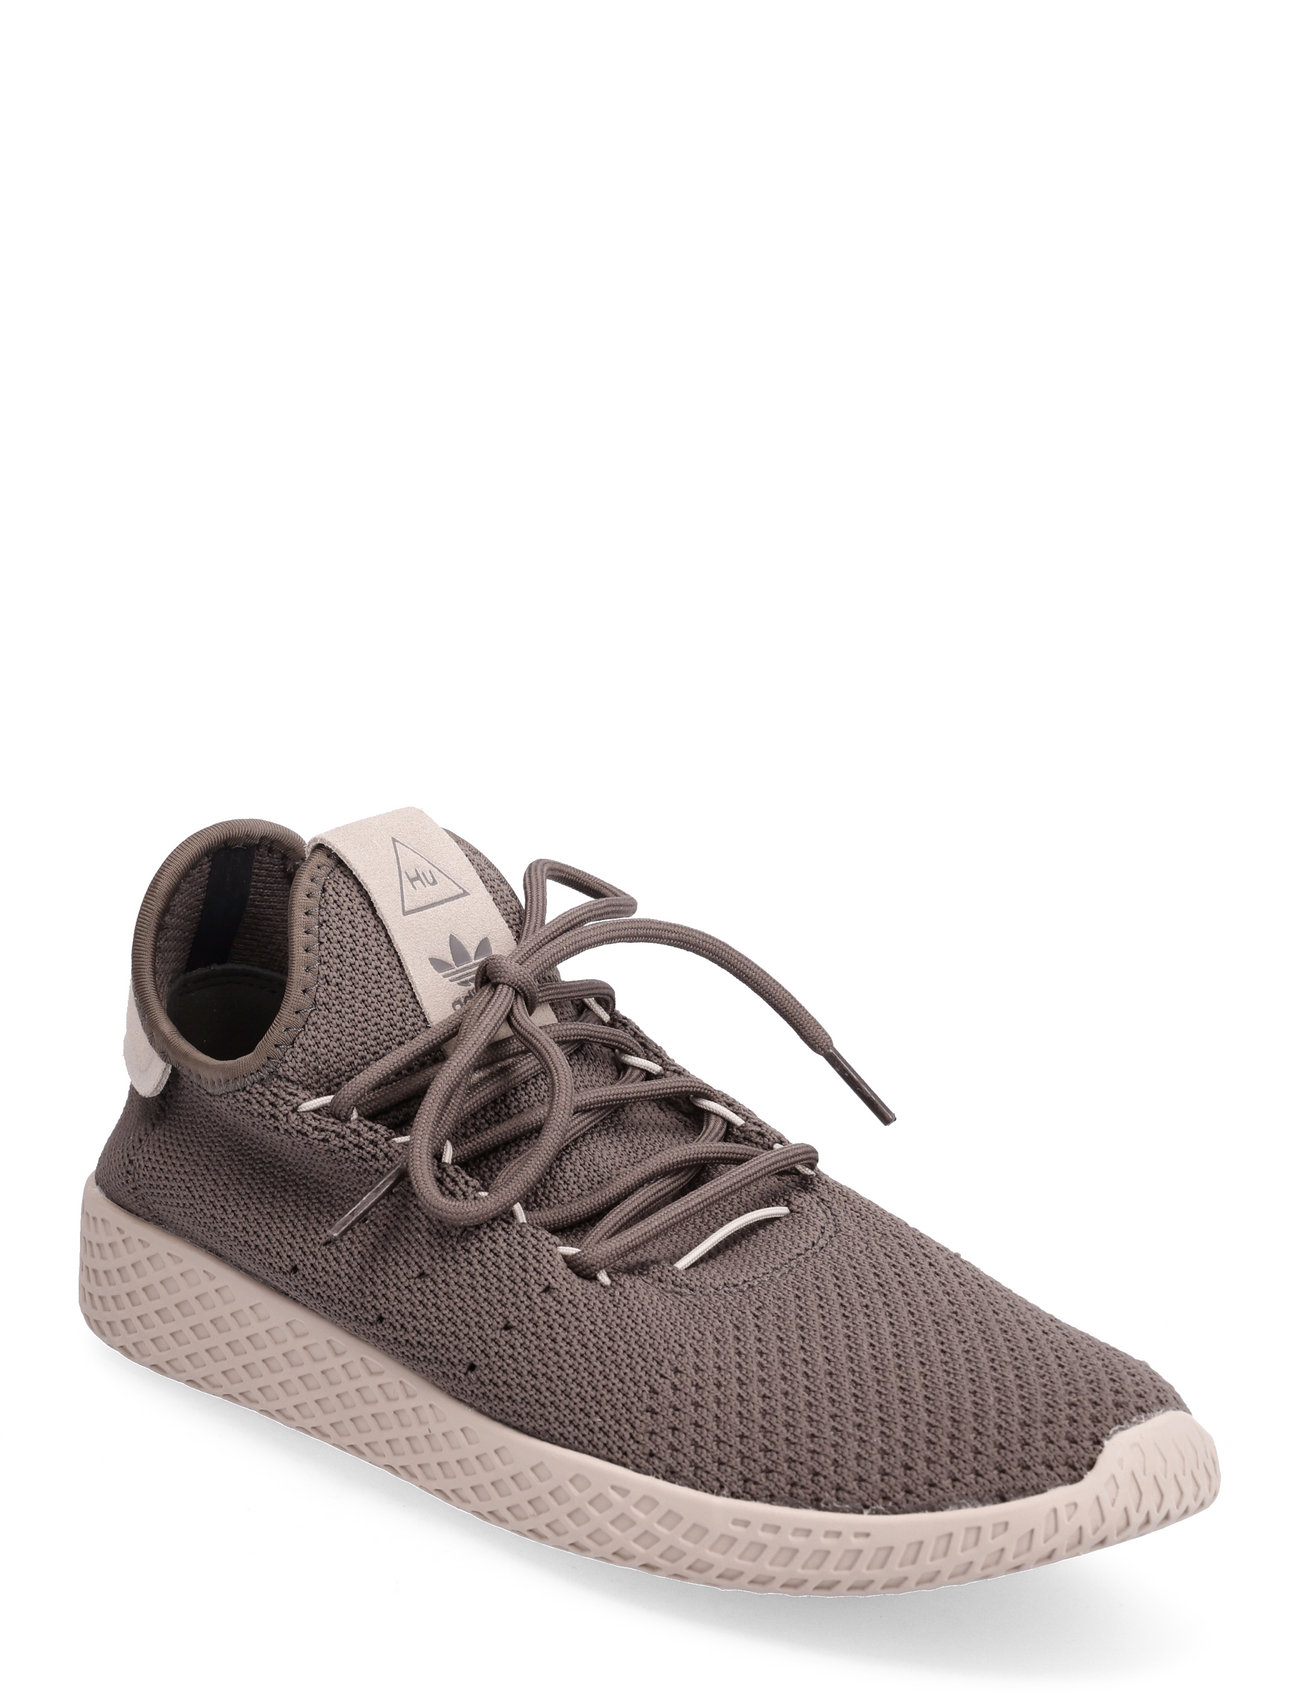 adidas Performance Pharrell Williams Shoes - Lave sneakers Boozt.com